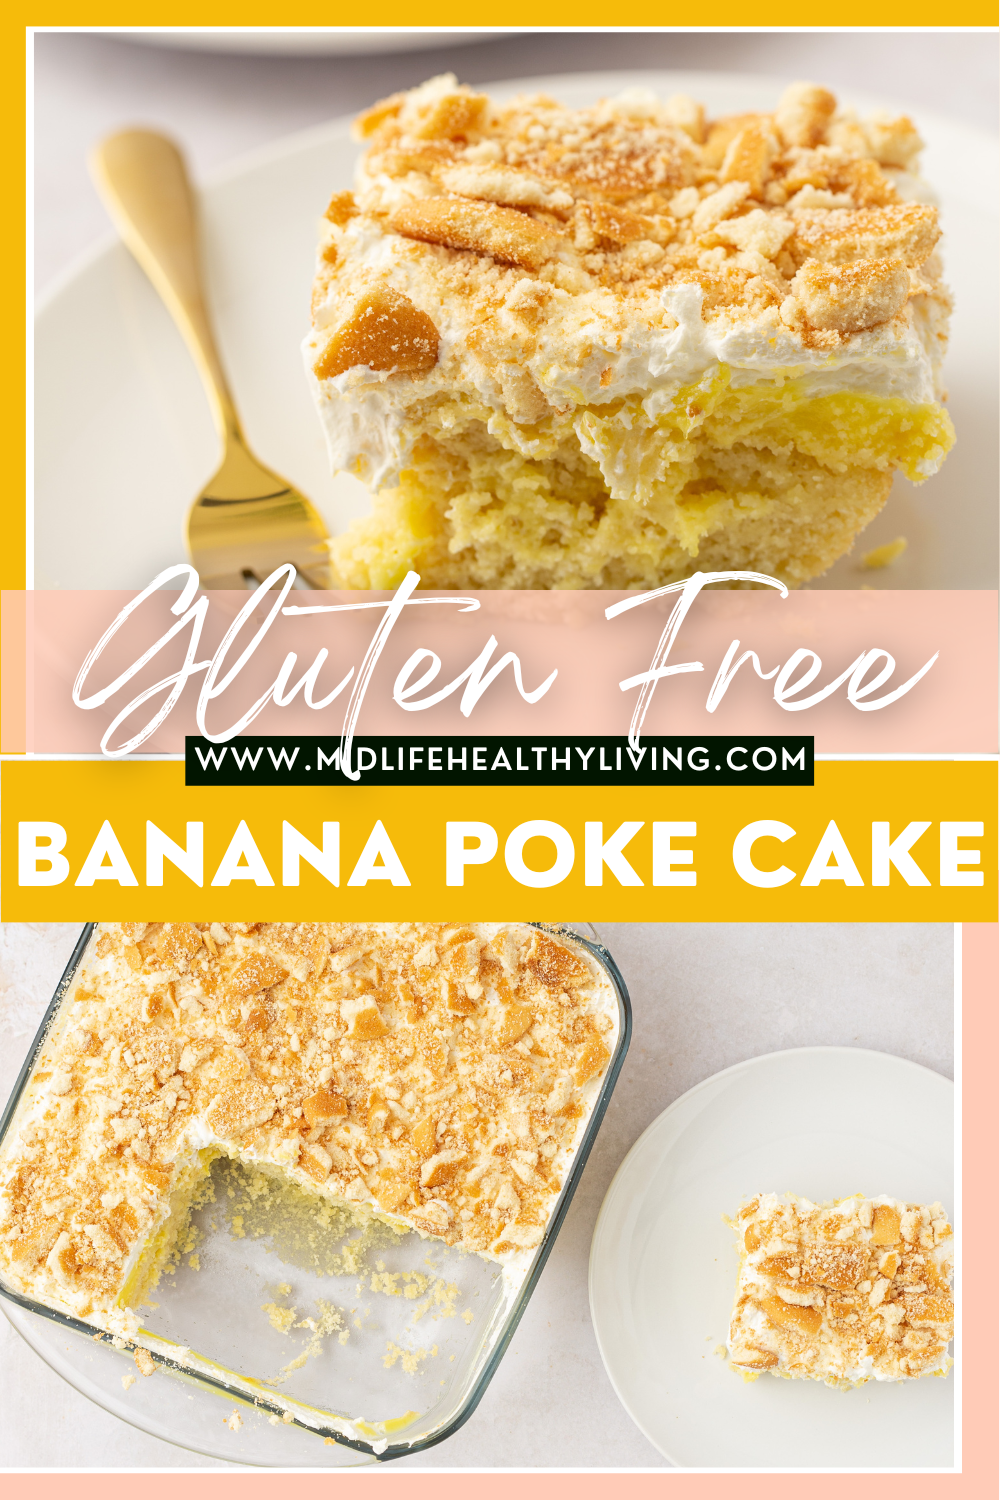 Pin showing finished gluten free banana poke cake with title across the middle.